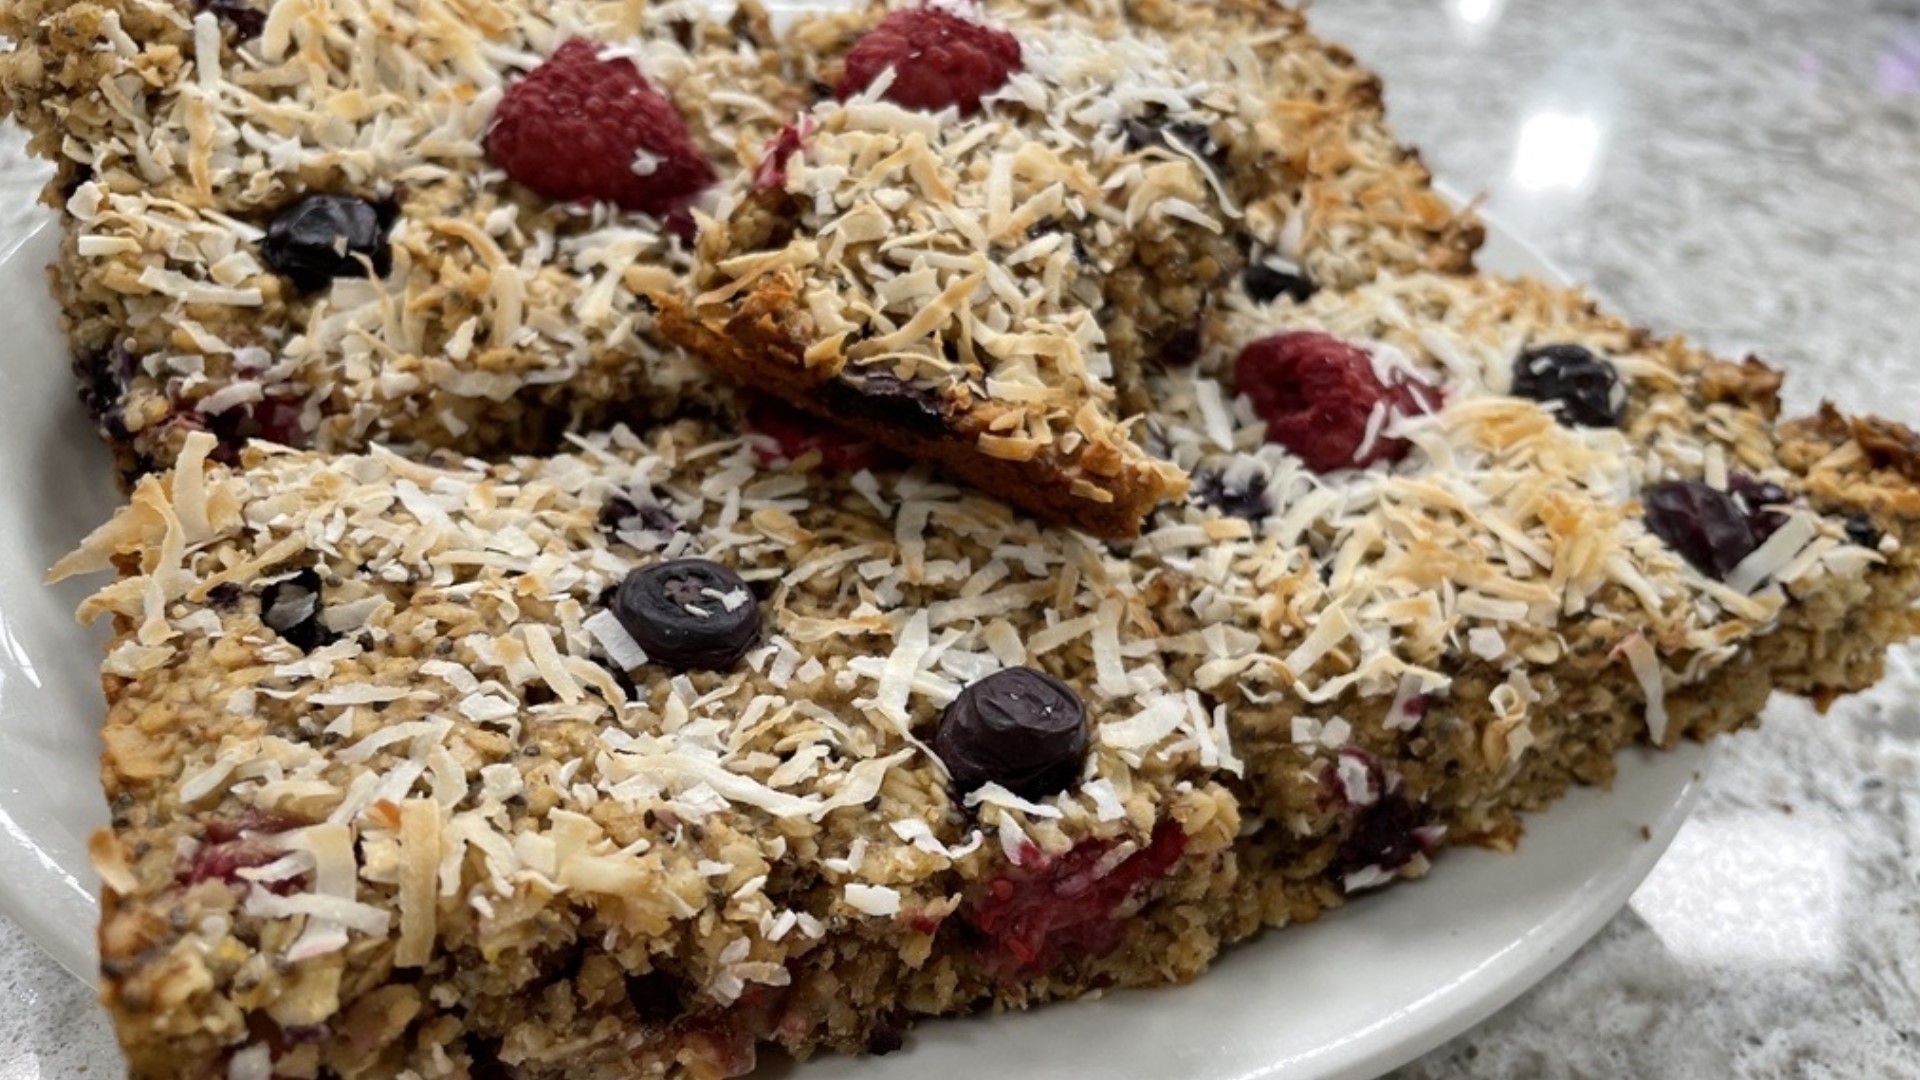 This oatmeal bake can be enjoyed right away or popped into the fridge to have all week long. While it's simple to make, it's also high in sweetness & antioxidants.